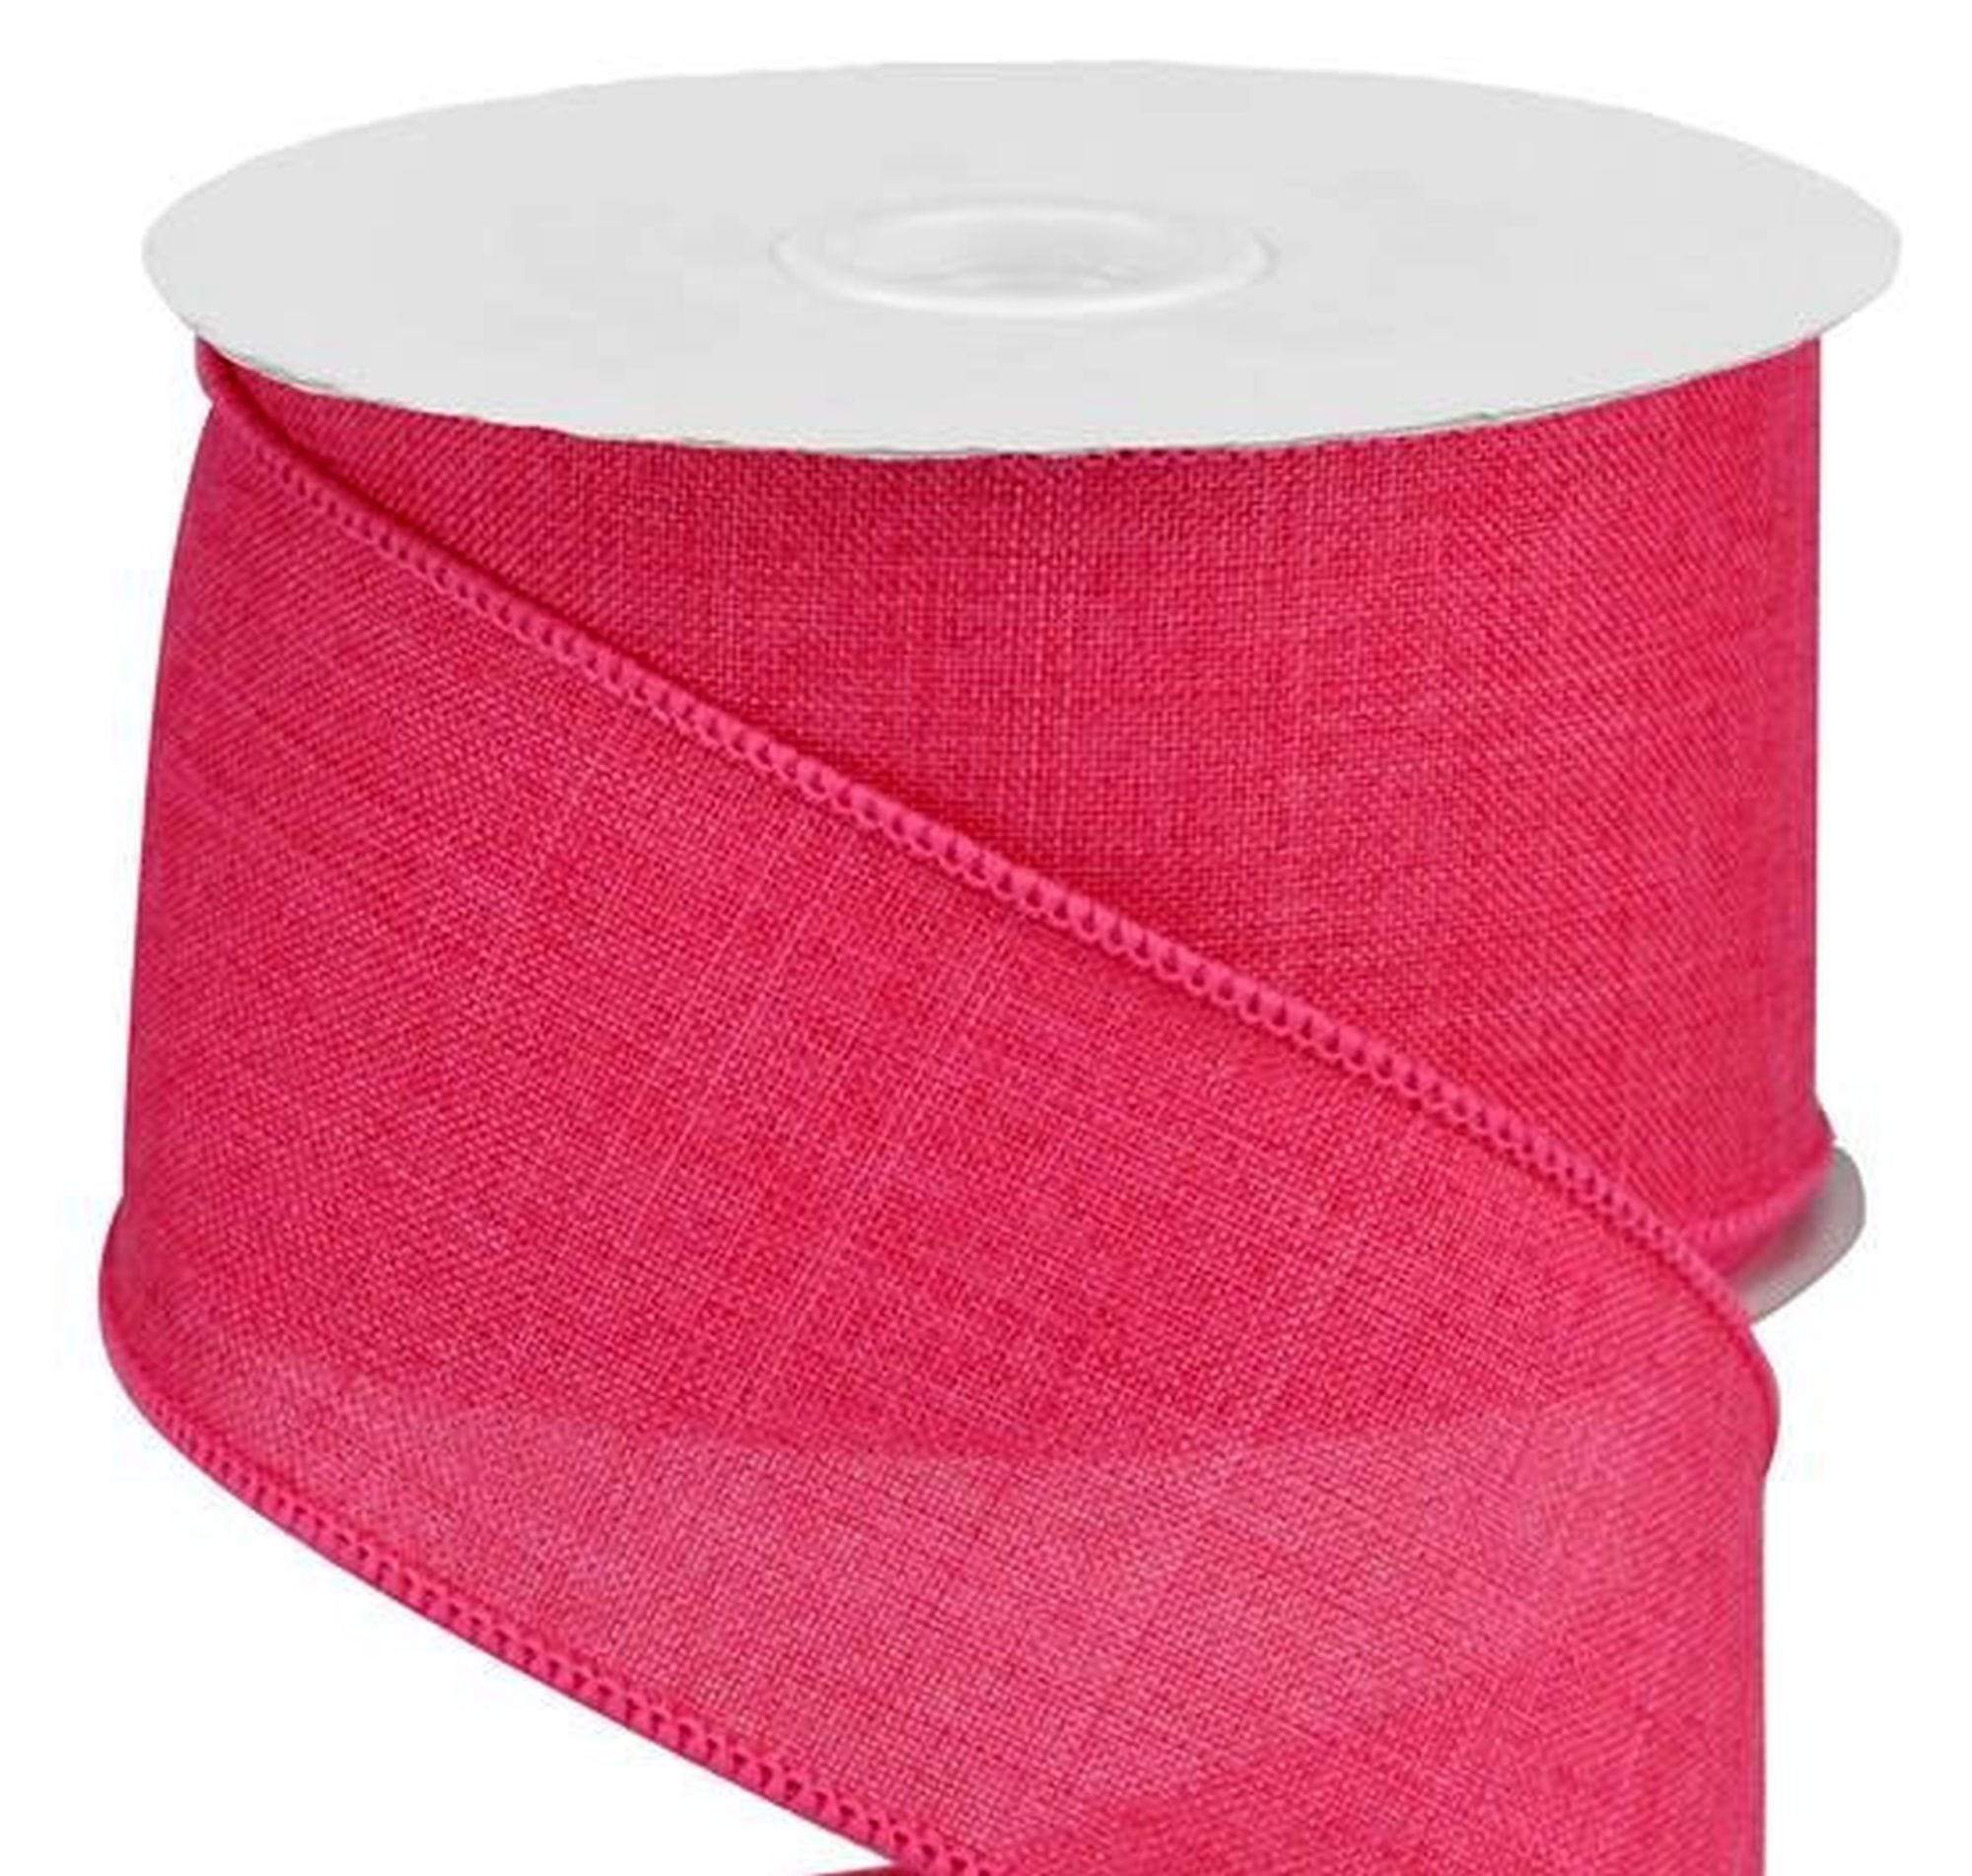 2.5 inch Hot Pink Ribbon - Wired Canvas Ribbon - 10 Yards